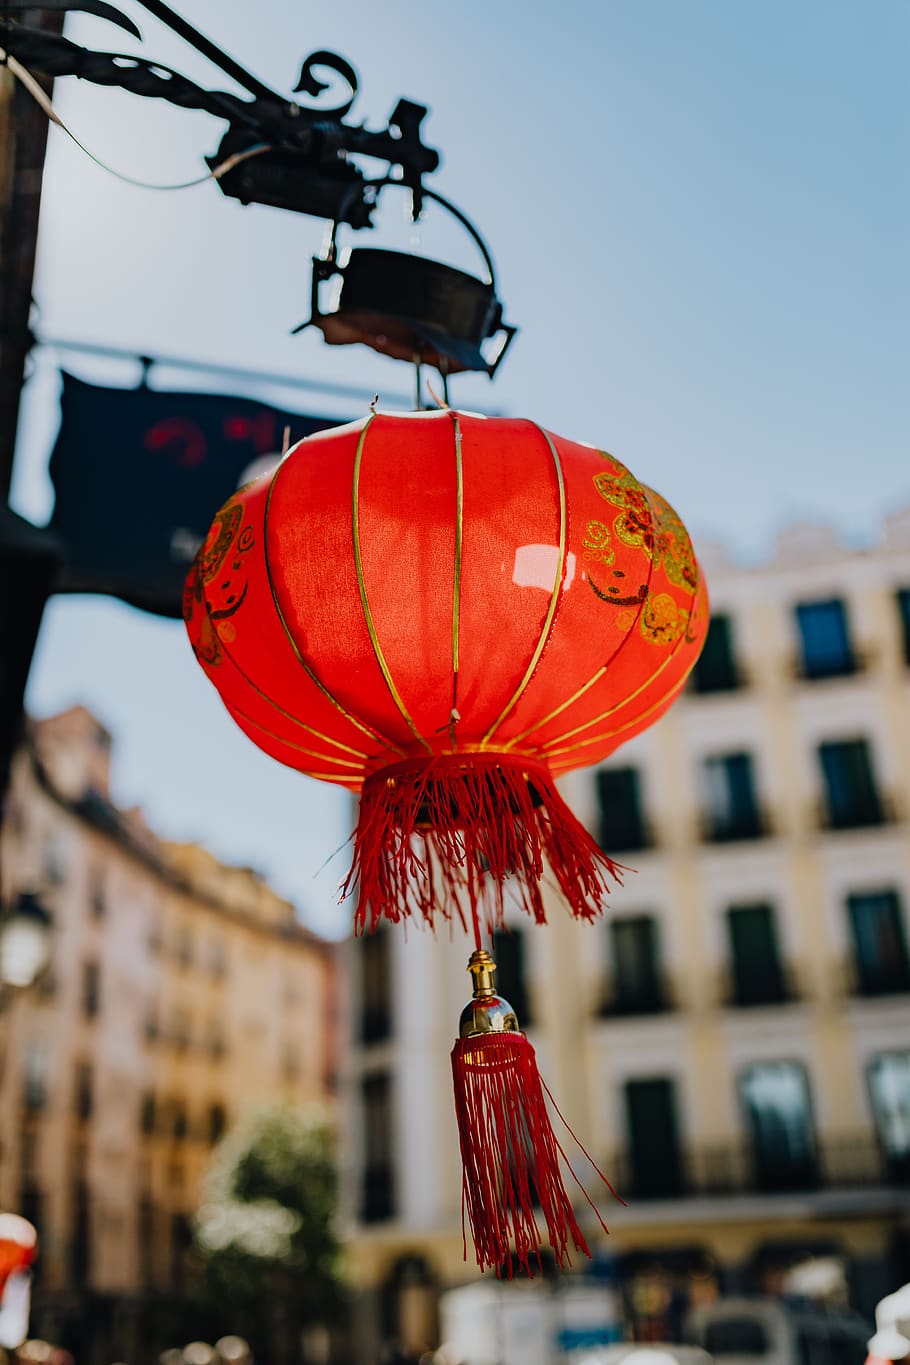 chinese, lamp, asia, lantern, traditional, Red, Madrid, Spain, building exterior, lighting equipment